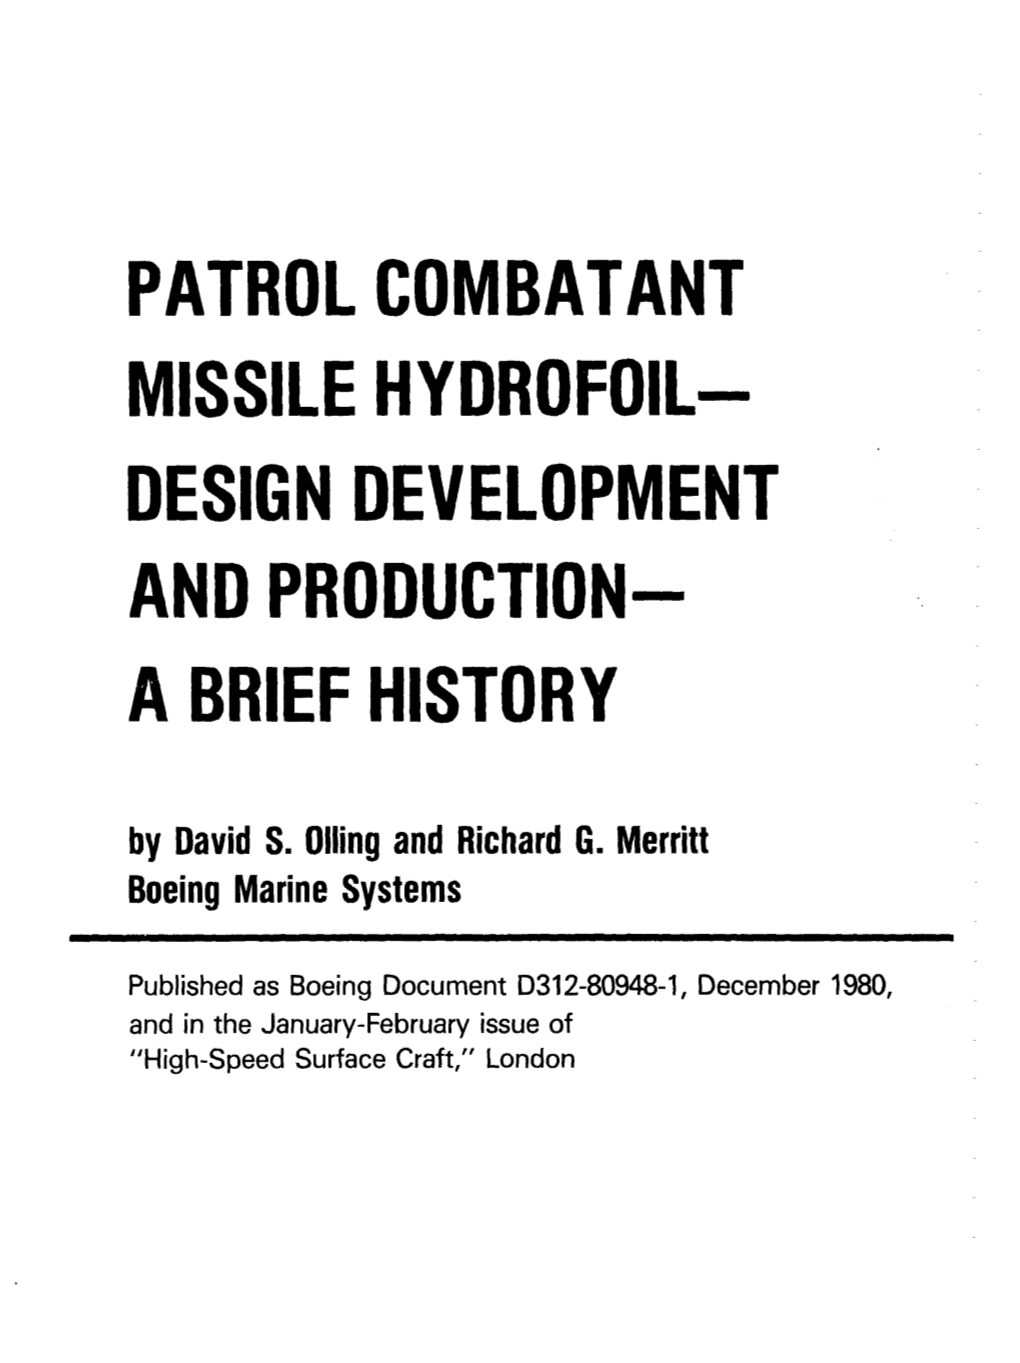 PATROL COMBATANT MISSILE HYDROFOIL- DESIGN DEVELOPMENT and PRODUCTION- a BRIEF HISTORY by David S